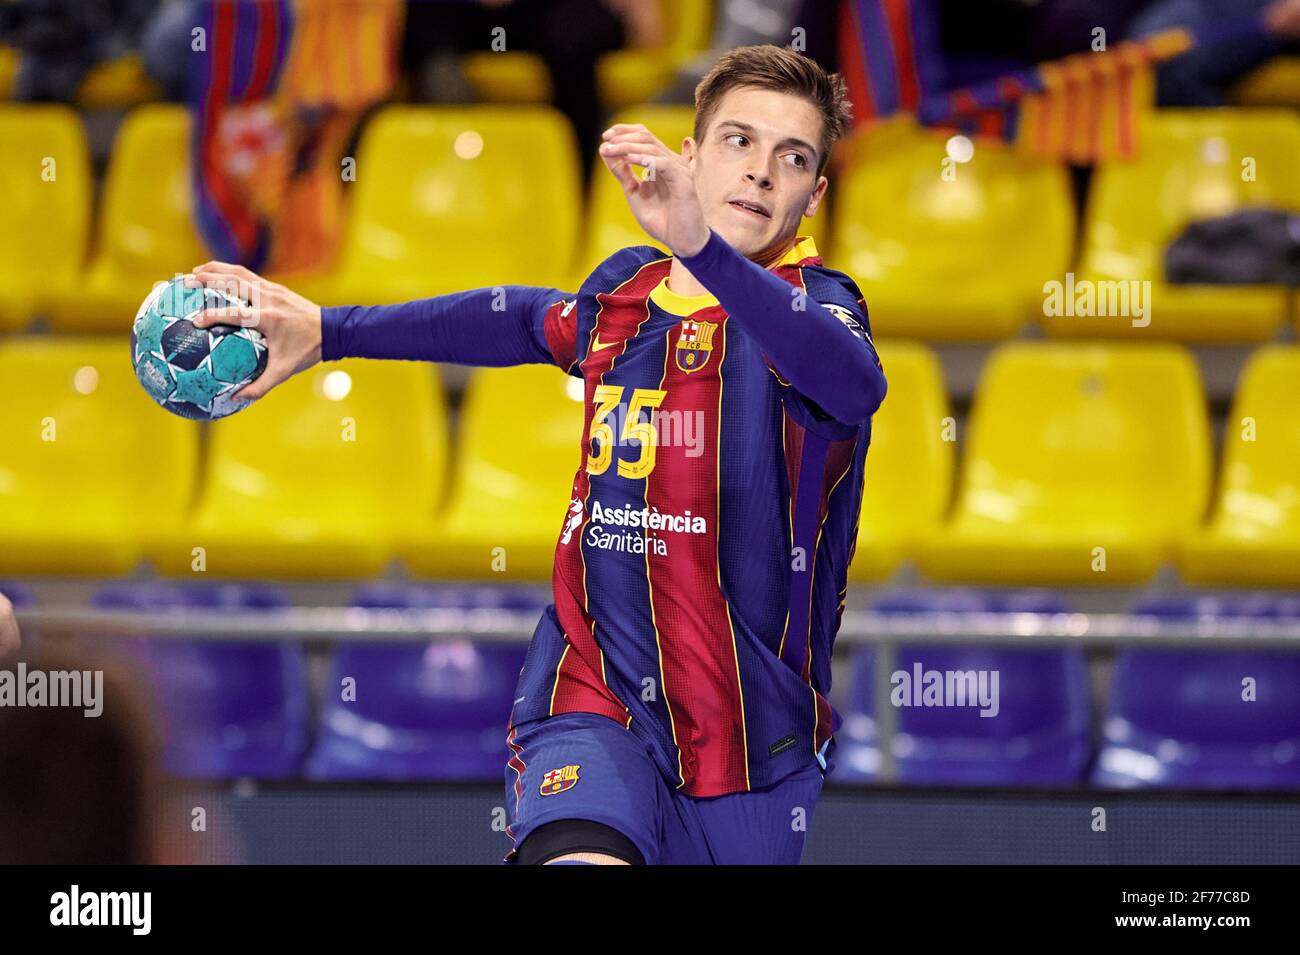 Barcelona, Barcelona, Spain. 5th Apr, 2021. Domen Makuc of FC Barcelona  during the second leg of the 1/8 final of the EHF Champions League match  between FC Barcelona and Elverum Handball at